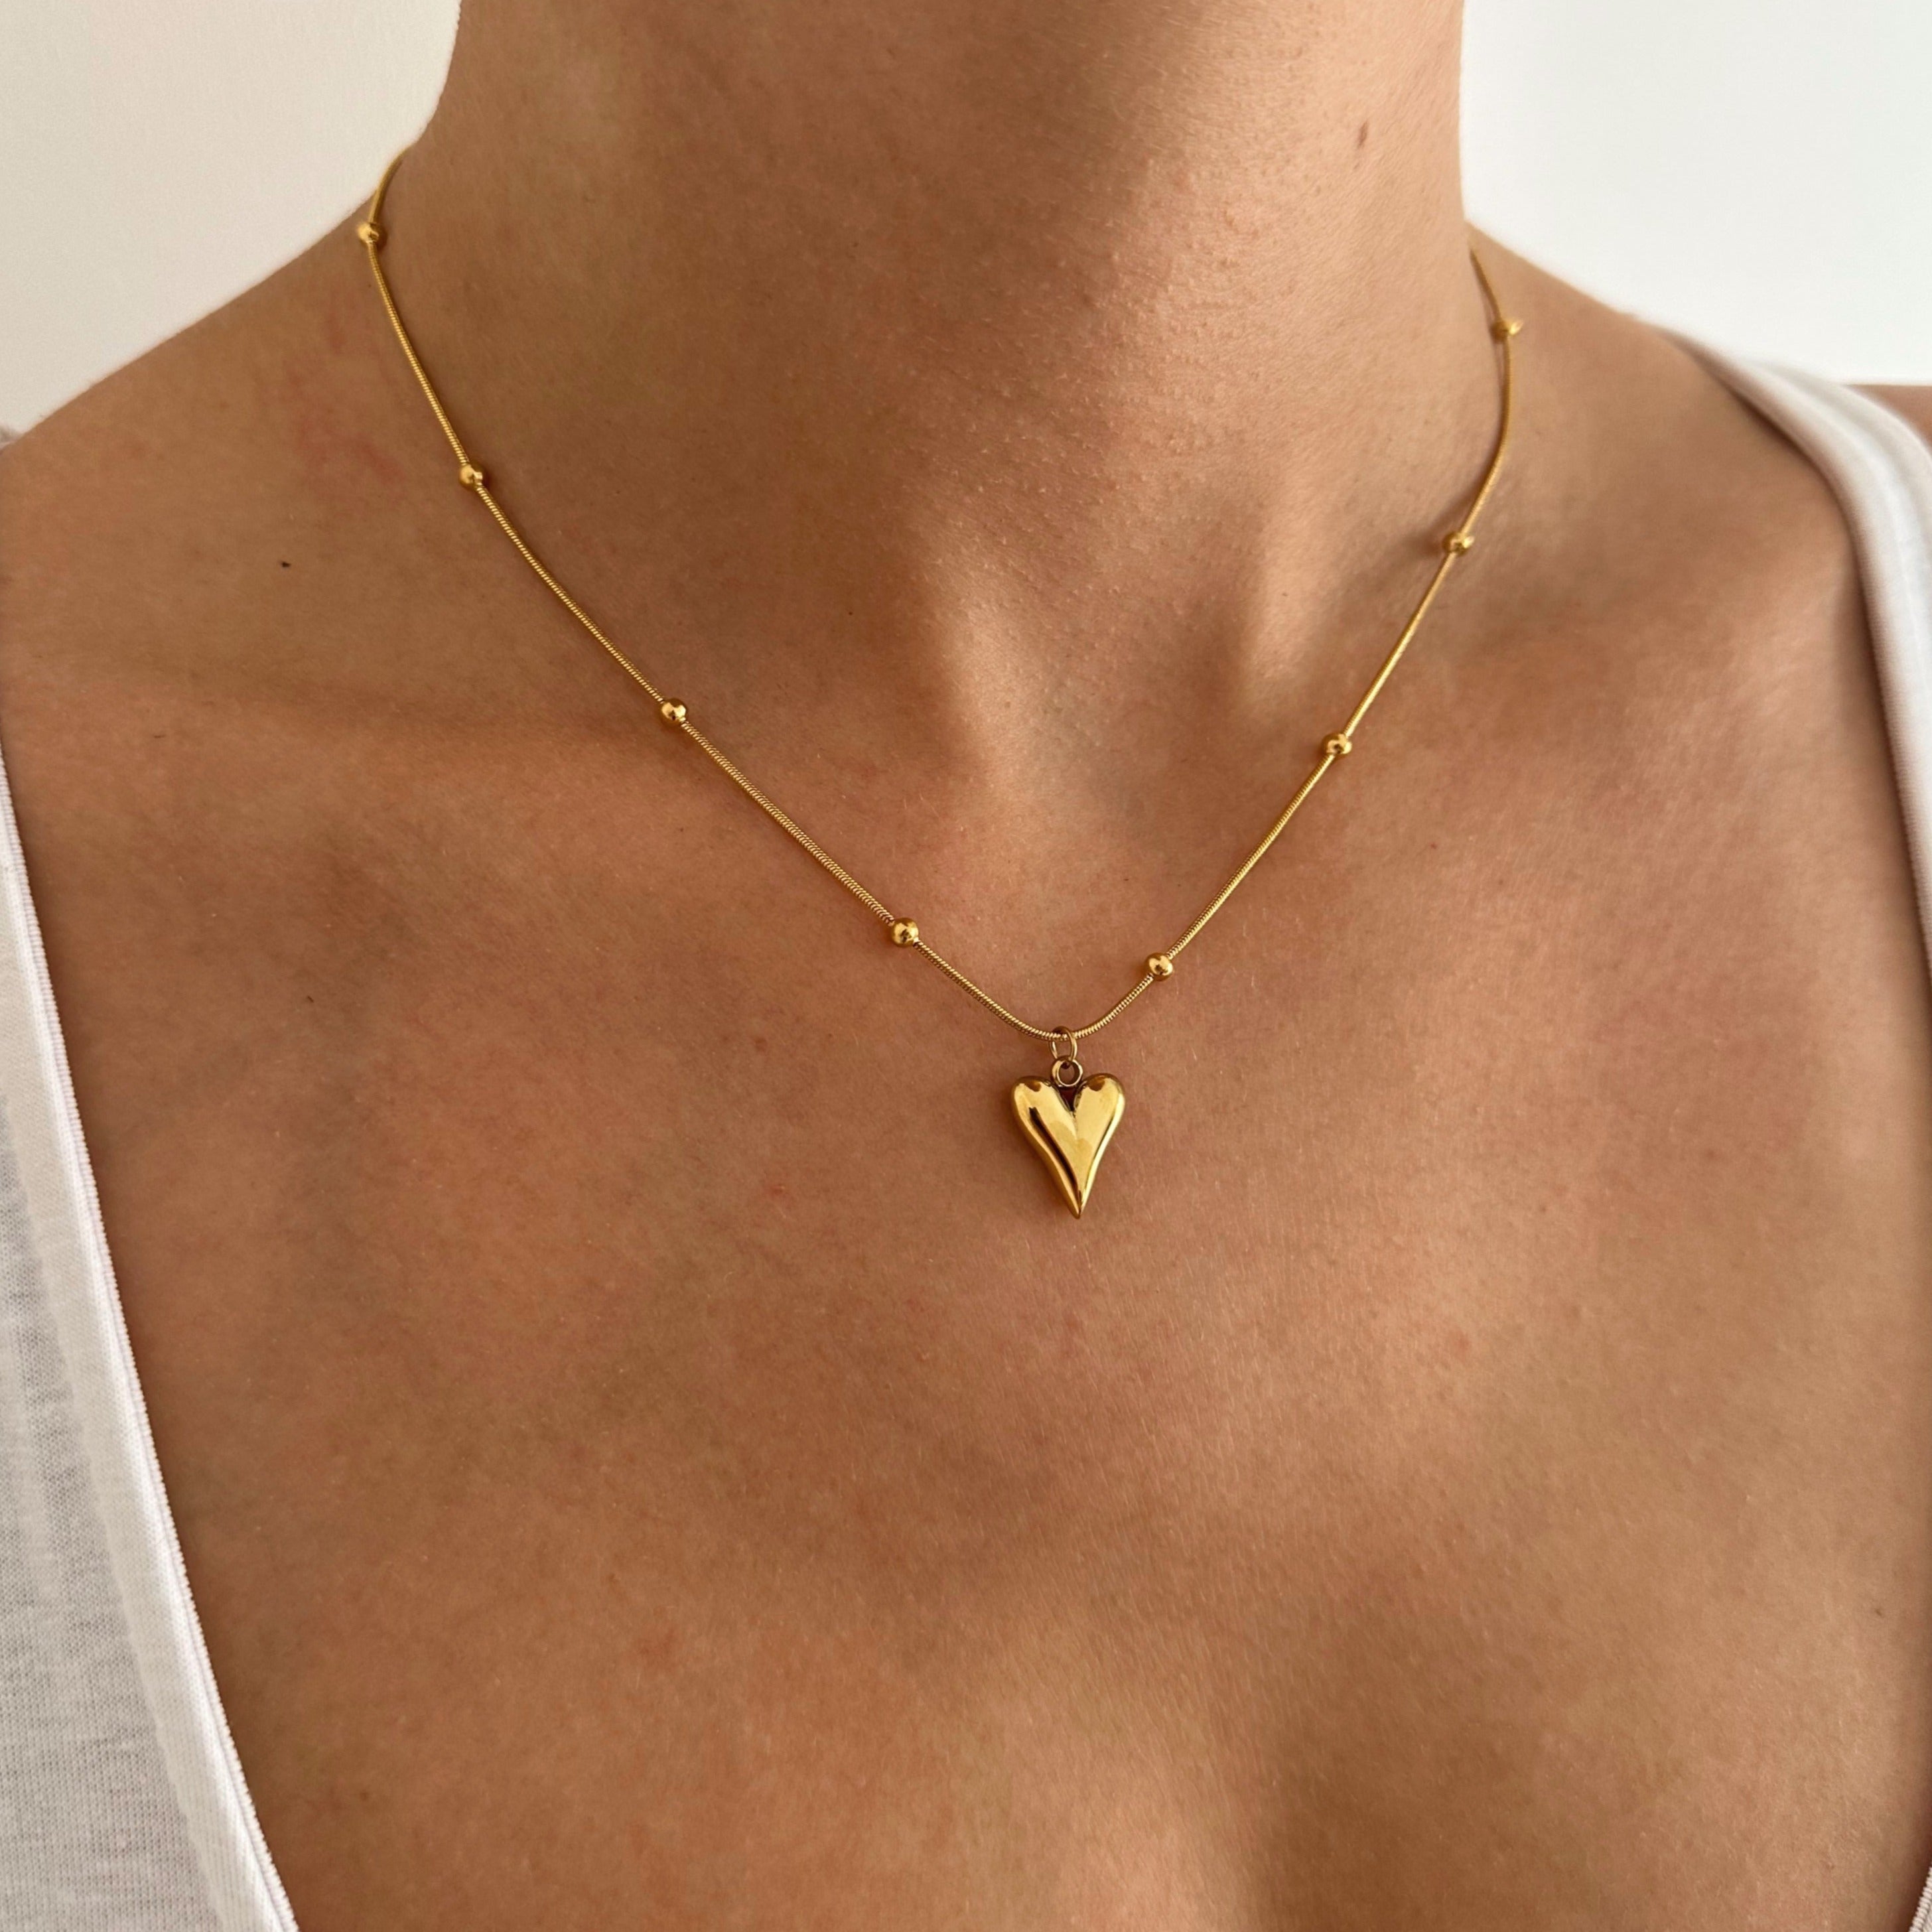 Heart Chain Necklace - Close-up of the exquisite golden heart pendant, highlighting its intricate detailing and luxurious shine against the delicate beaded chain.